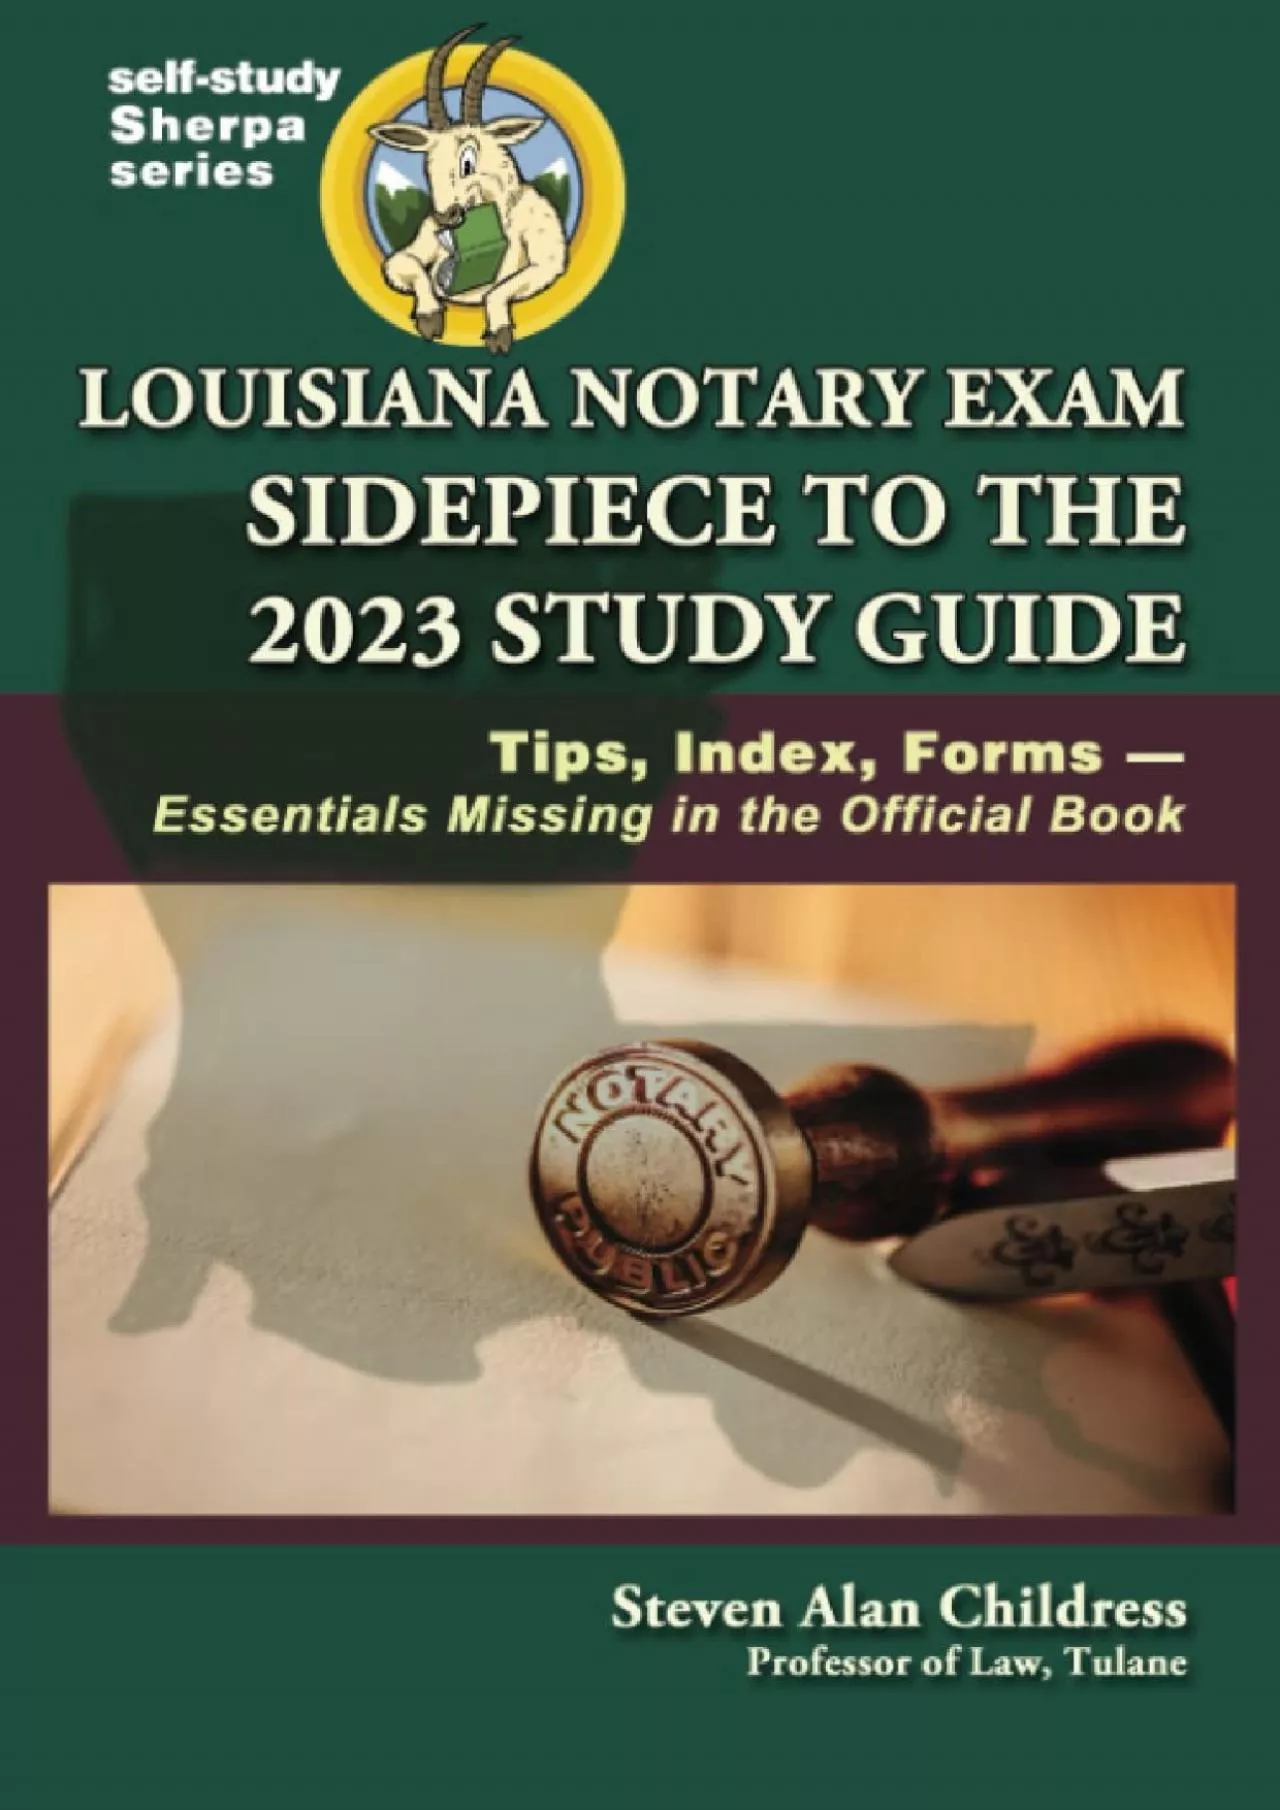 [READ] Louisiana Notary Exam Sidepiece to the 2023 Study Guide: Tips, Index, Forms—Essentials